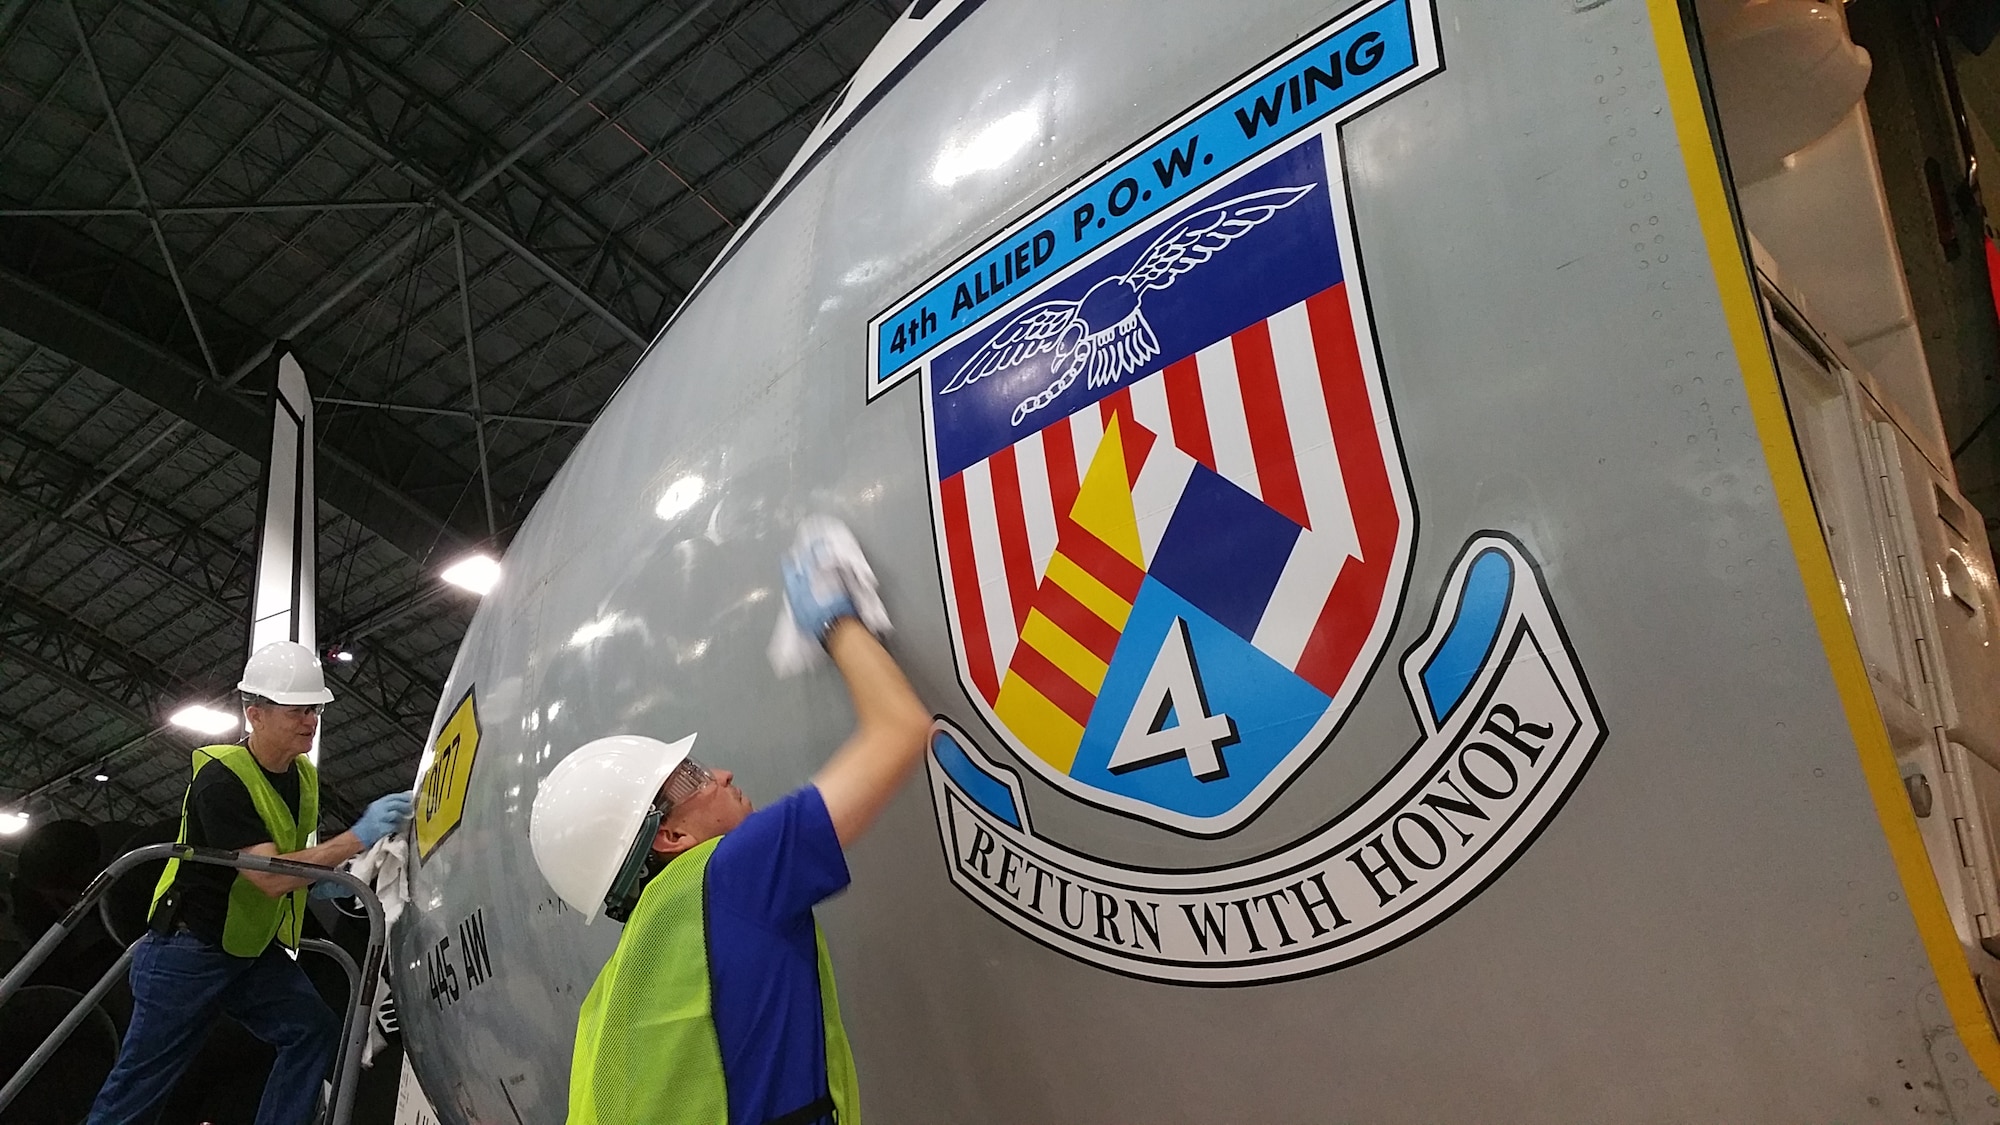 Volunteers cleaning and polishing the C-141 Starlifter "Hanoi Taxi" on January 28, 2016. The work is being done in preparation for the museum's new fourth building, which opens June 8th.